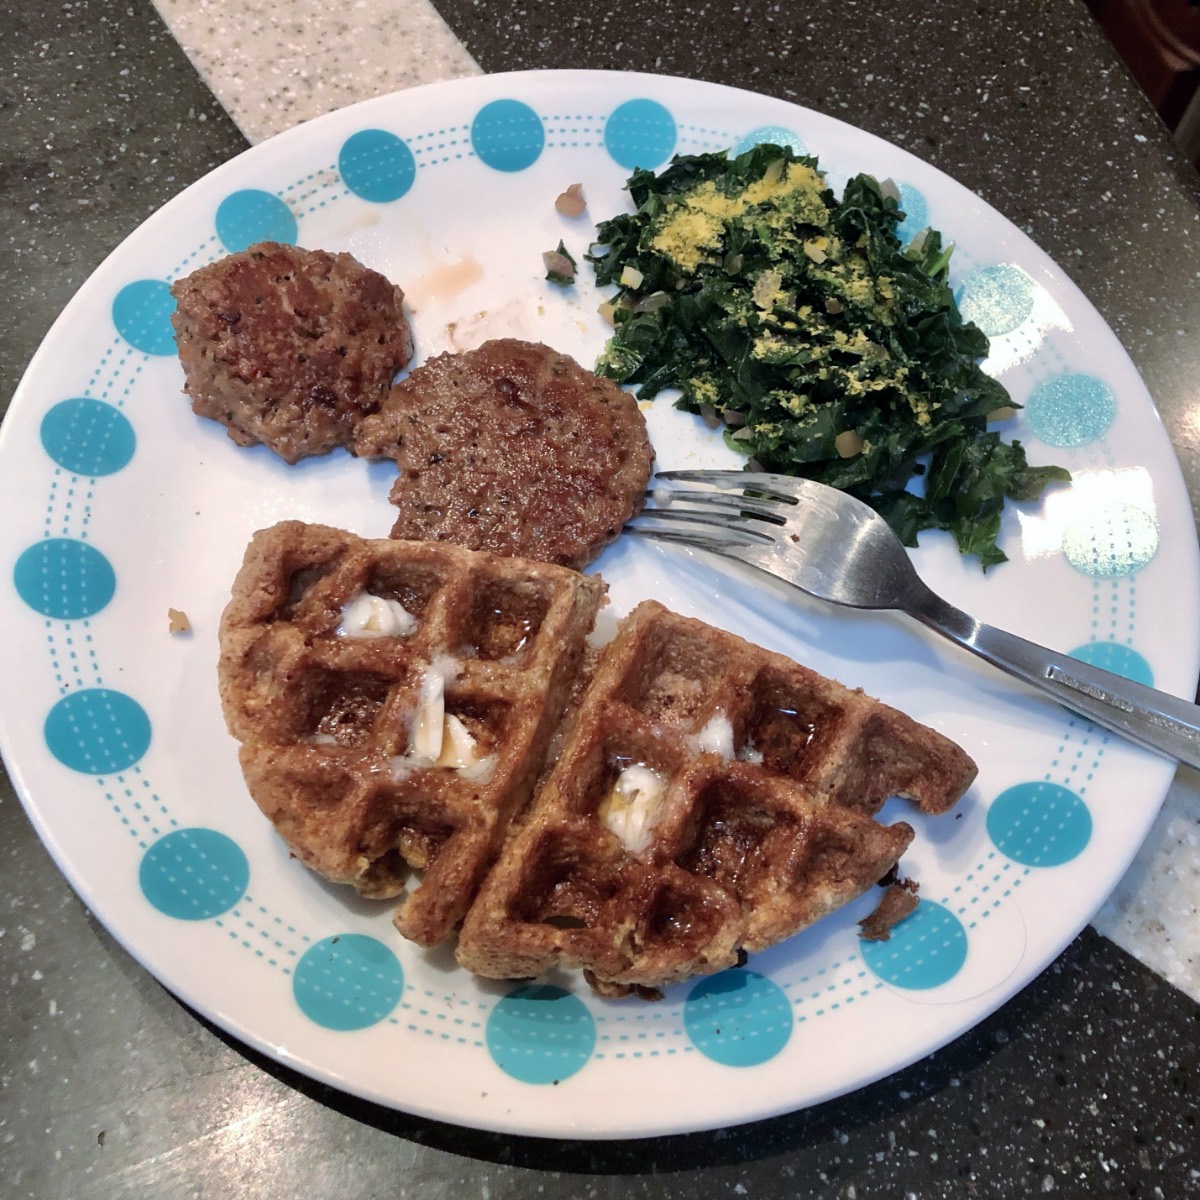 vegan belgian waffle, impossible sausage and kale on a plate.